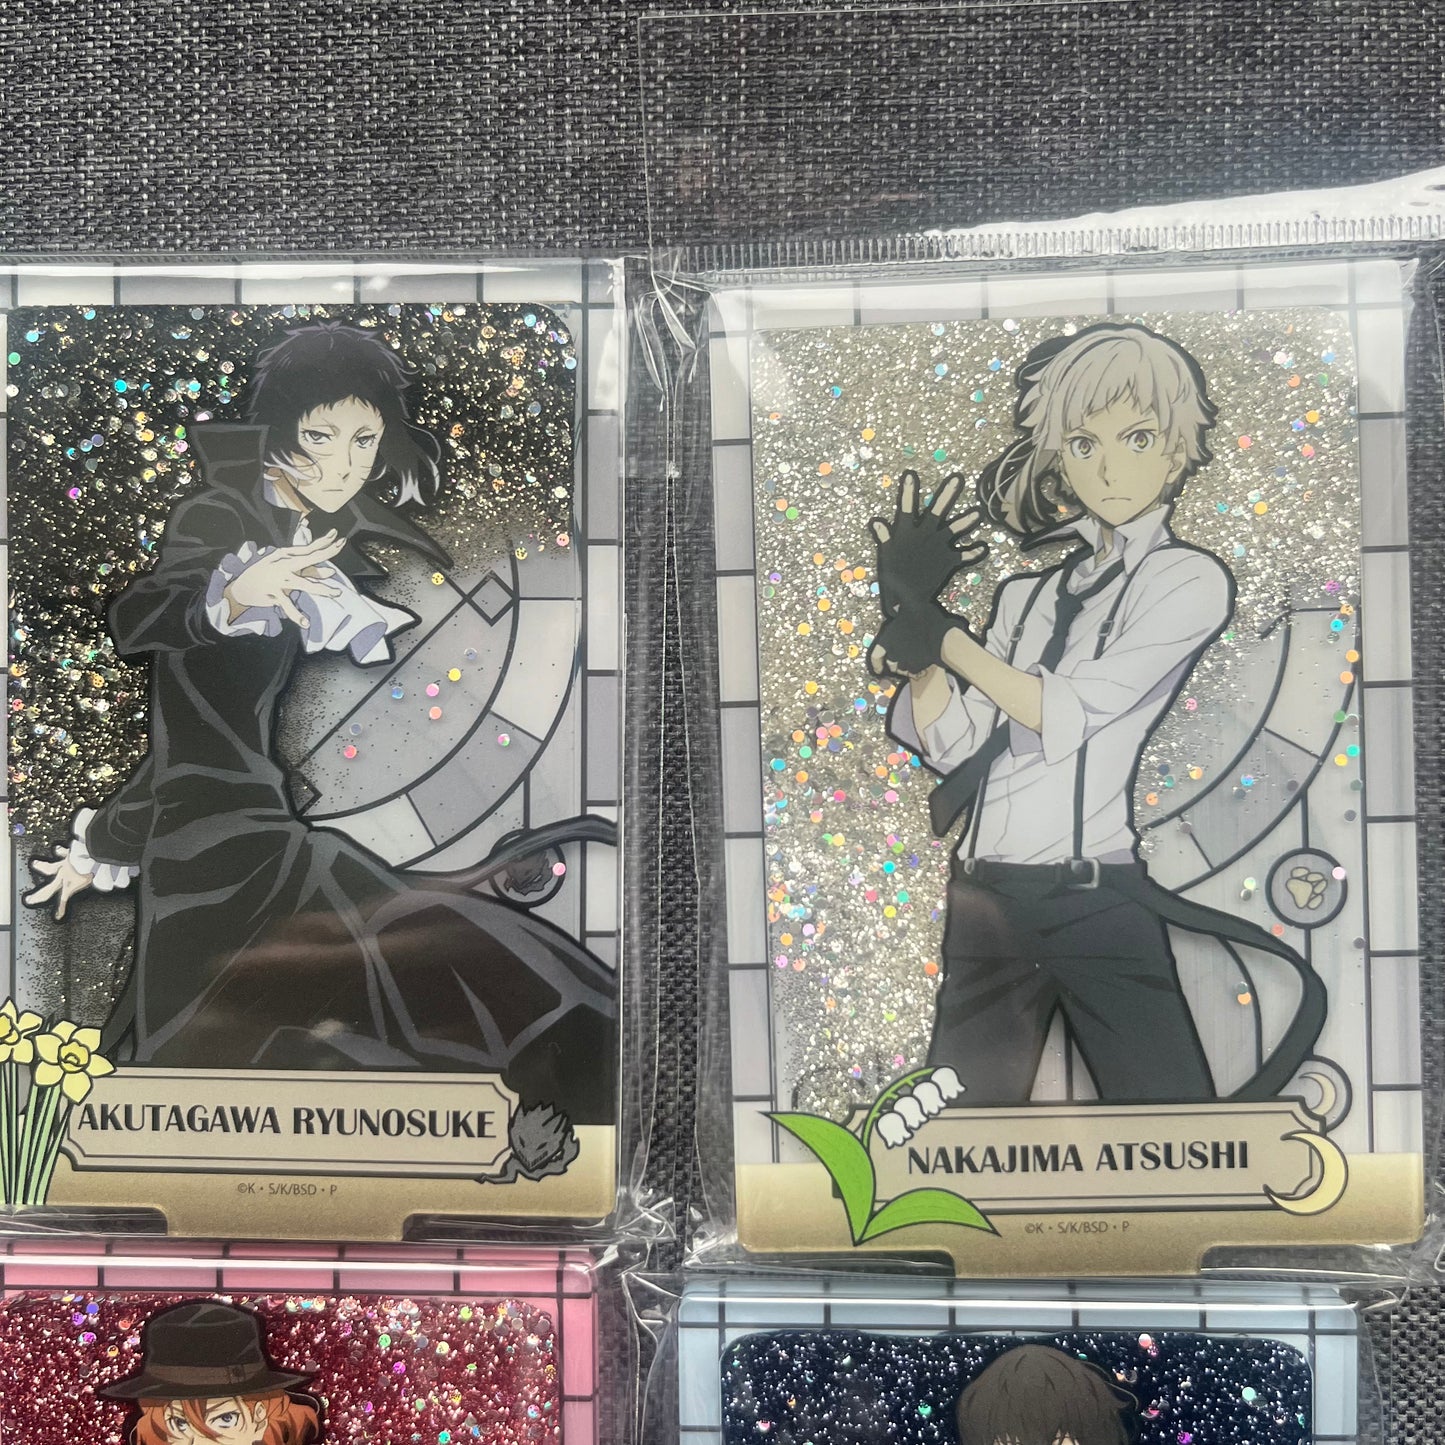 Bungou Stray Dogs Glitter Acrylic Standees